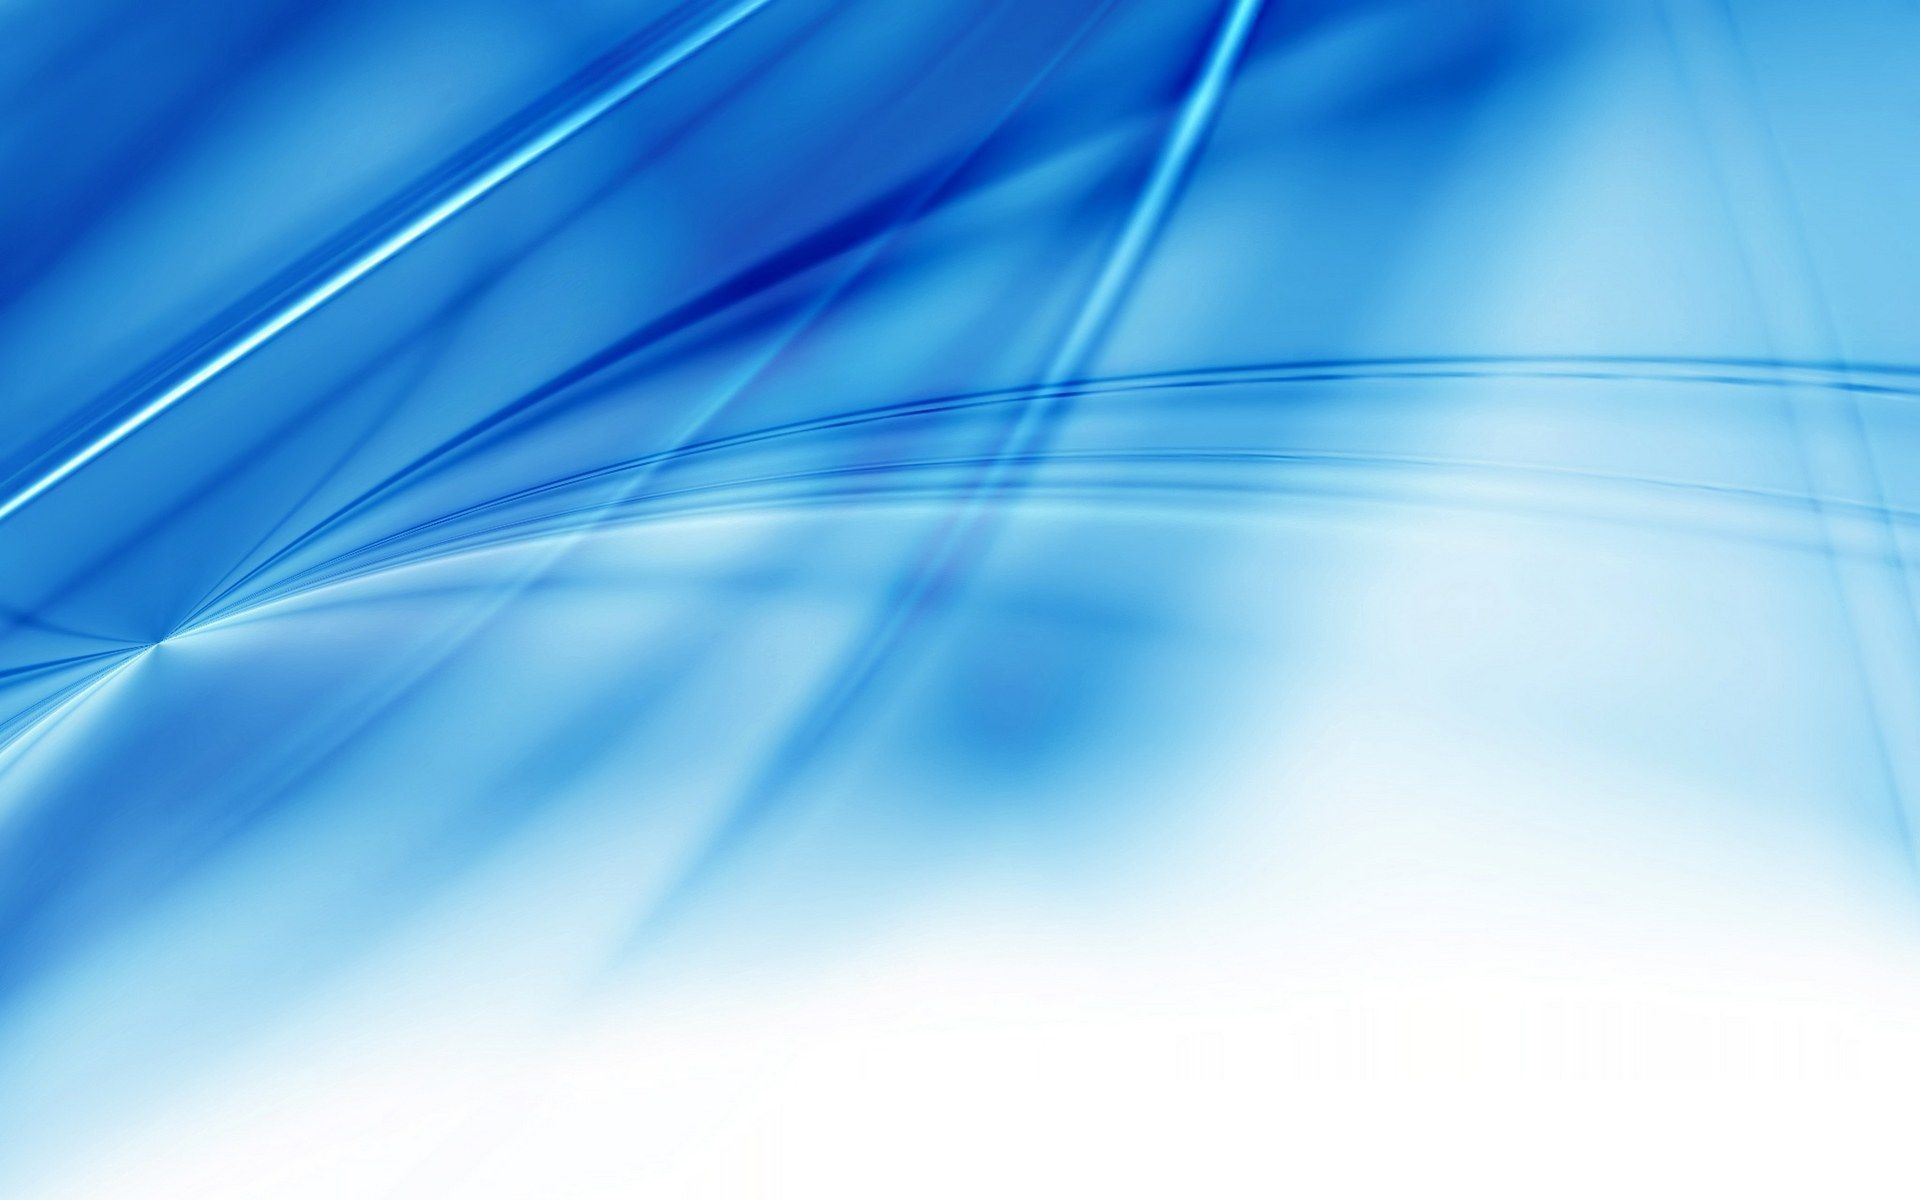 Blue and White Abstract Wallpaper Free Blue and White Abstract Background